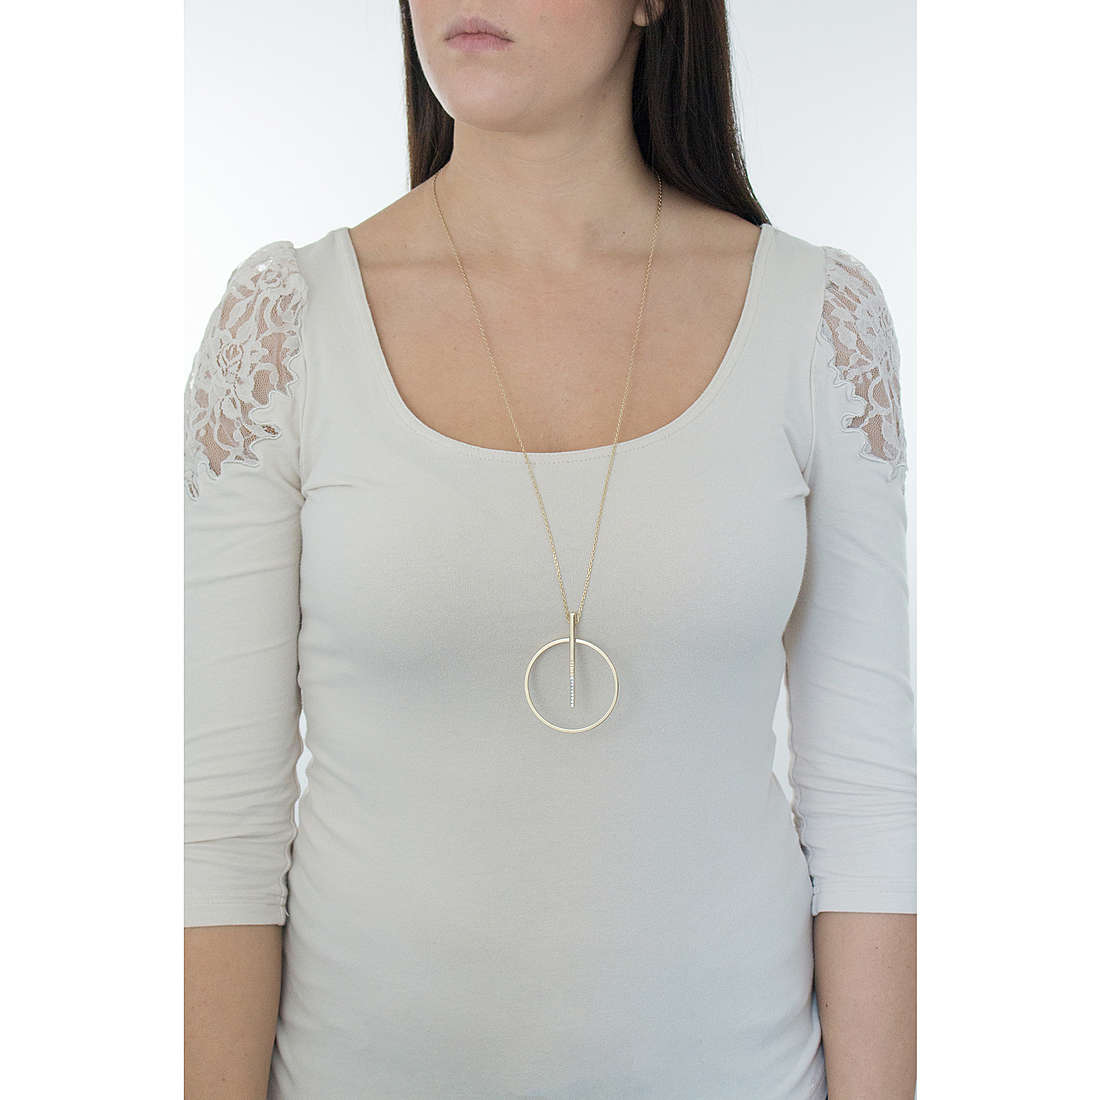 Guess necklaces Future Essential woman UBN84059 wearing